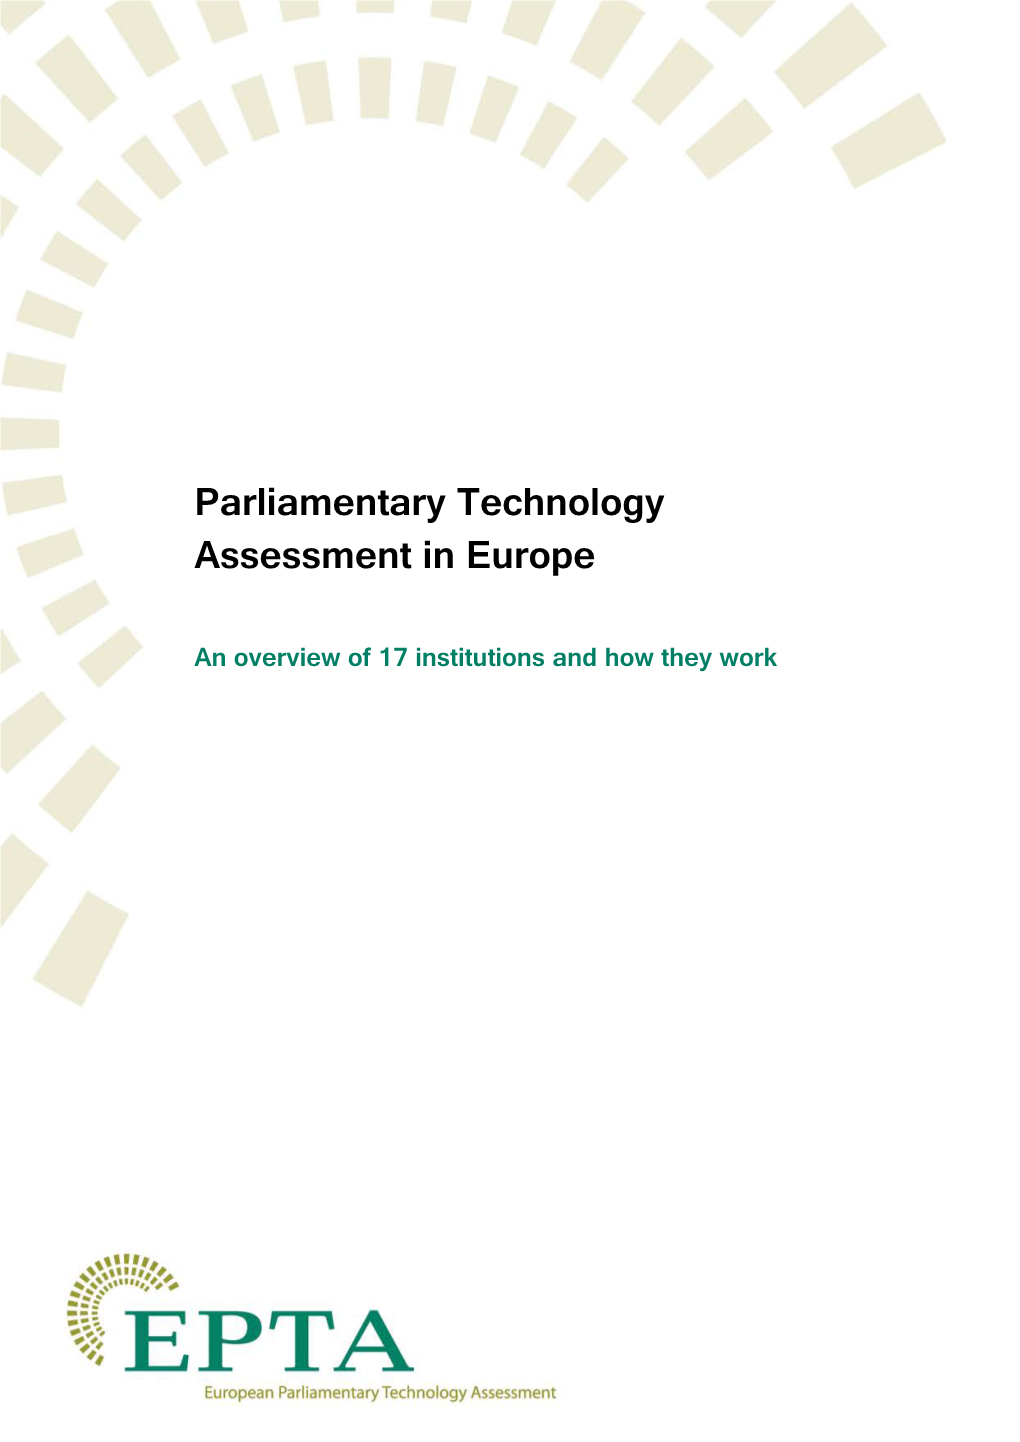 Technology Assessment for the Parliament of Catalonia